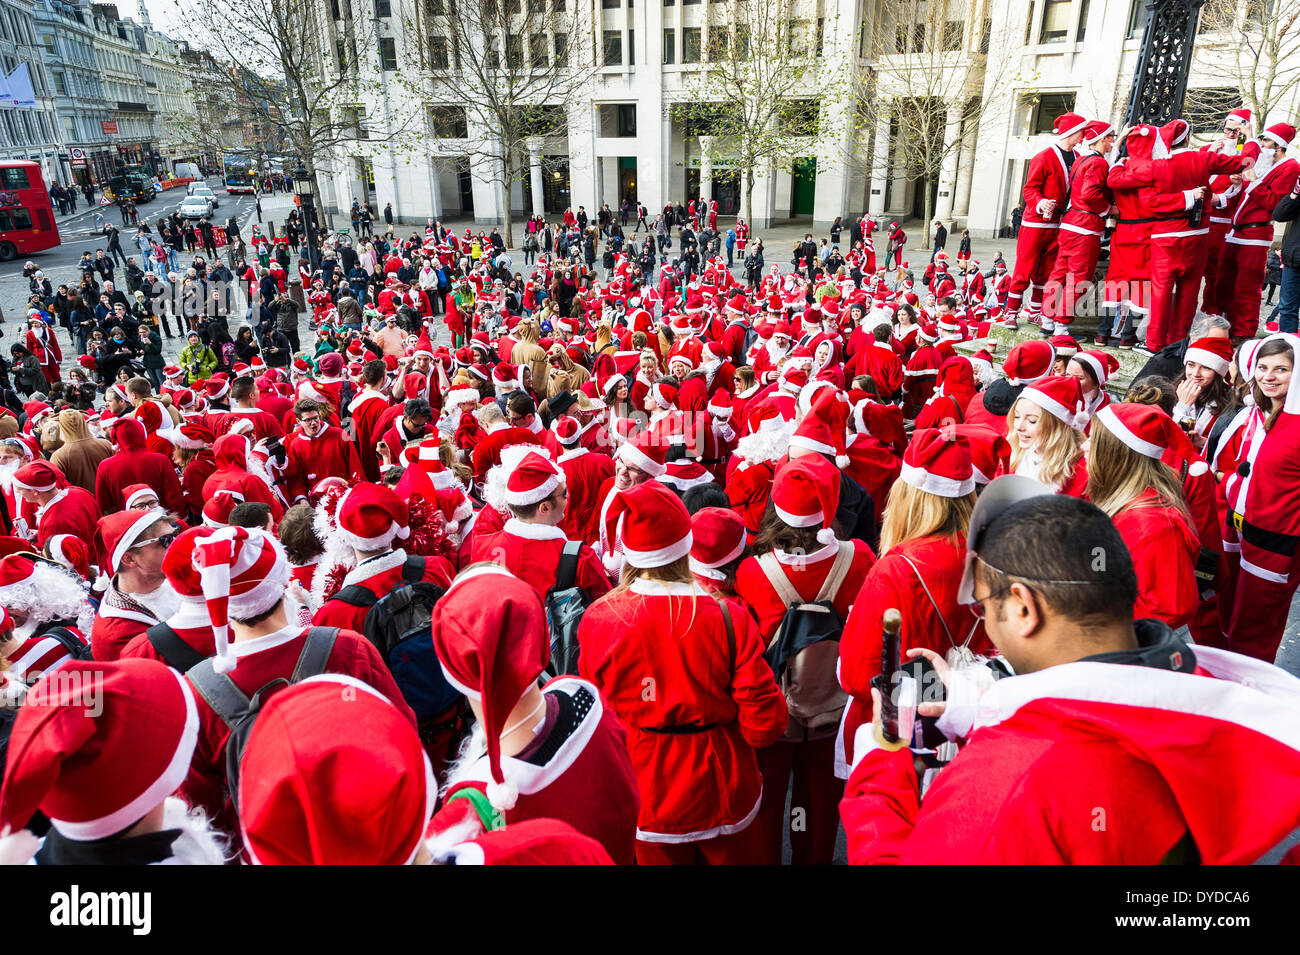 A mass gathering of Santas meeting on the steps of St Pauls Cathedral to celebrate the annual Santacon. Stock Photo